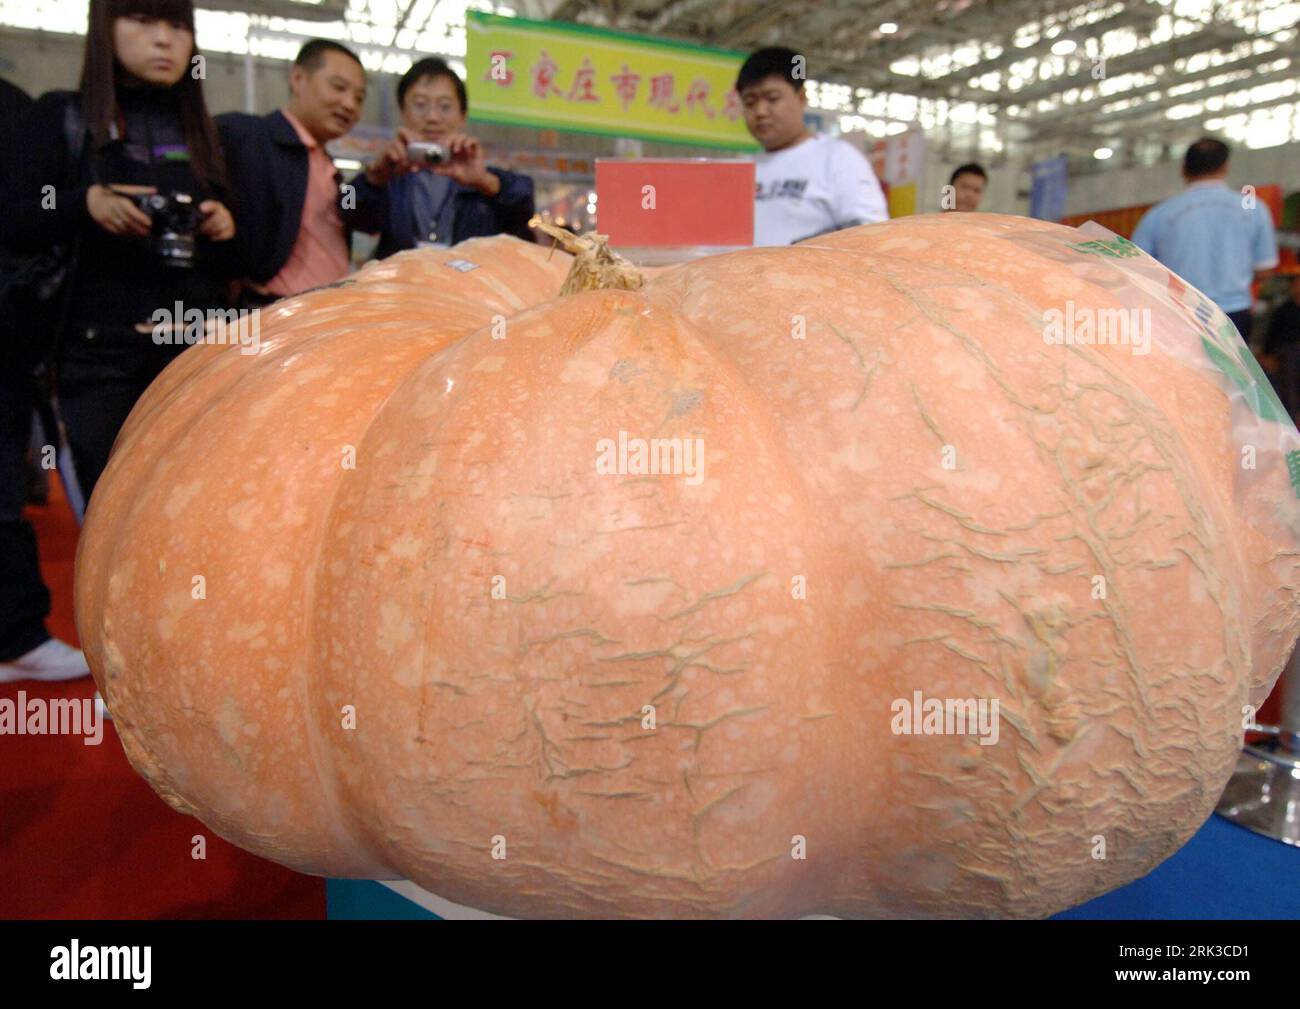 Bildnummer: 53433575  Datum: 26.09.2009  Copyright: imago/Xinhua (090926) -- LANGFANG (HEBEI), Sept. 26, 2009 (Xinhua) -- Visitors take photos of a big pumpkin which weighs about 248 kilograms during the 13th China Langfang Farm Products Fair in Langfang of north China s Hebei Province, Sept. 26, 2009. The three-day fair opened Saturday with over 1,000 participants around the country. (Xinhua/Gong Zhihong) (hdt) (1)CHINA-LANGFANG-FARM PRODUCTS-FAIR (CN) PUBLICATIONxNOTxINxCHN Landwirtschaft Wirtschaft Kbdig xdp 2009 quer o0 Messe Landwirtschaftsmesse Kürbis    Bildnummer 53433575 Date 26 09 20 Stock Photo